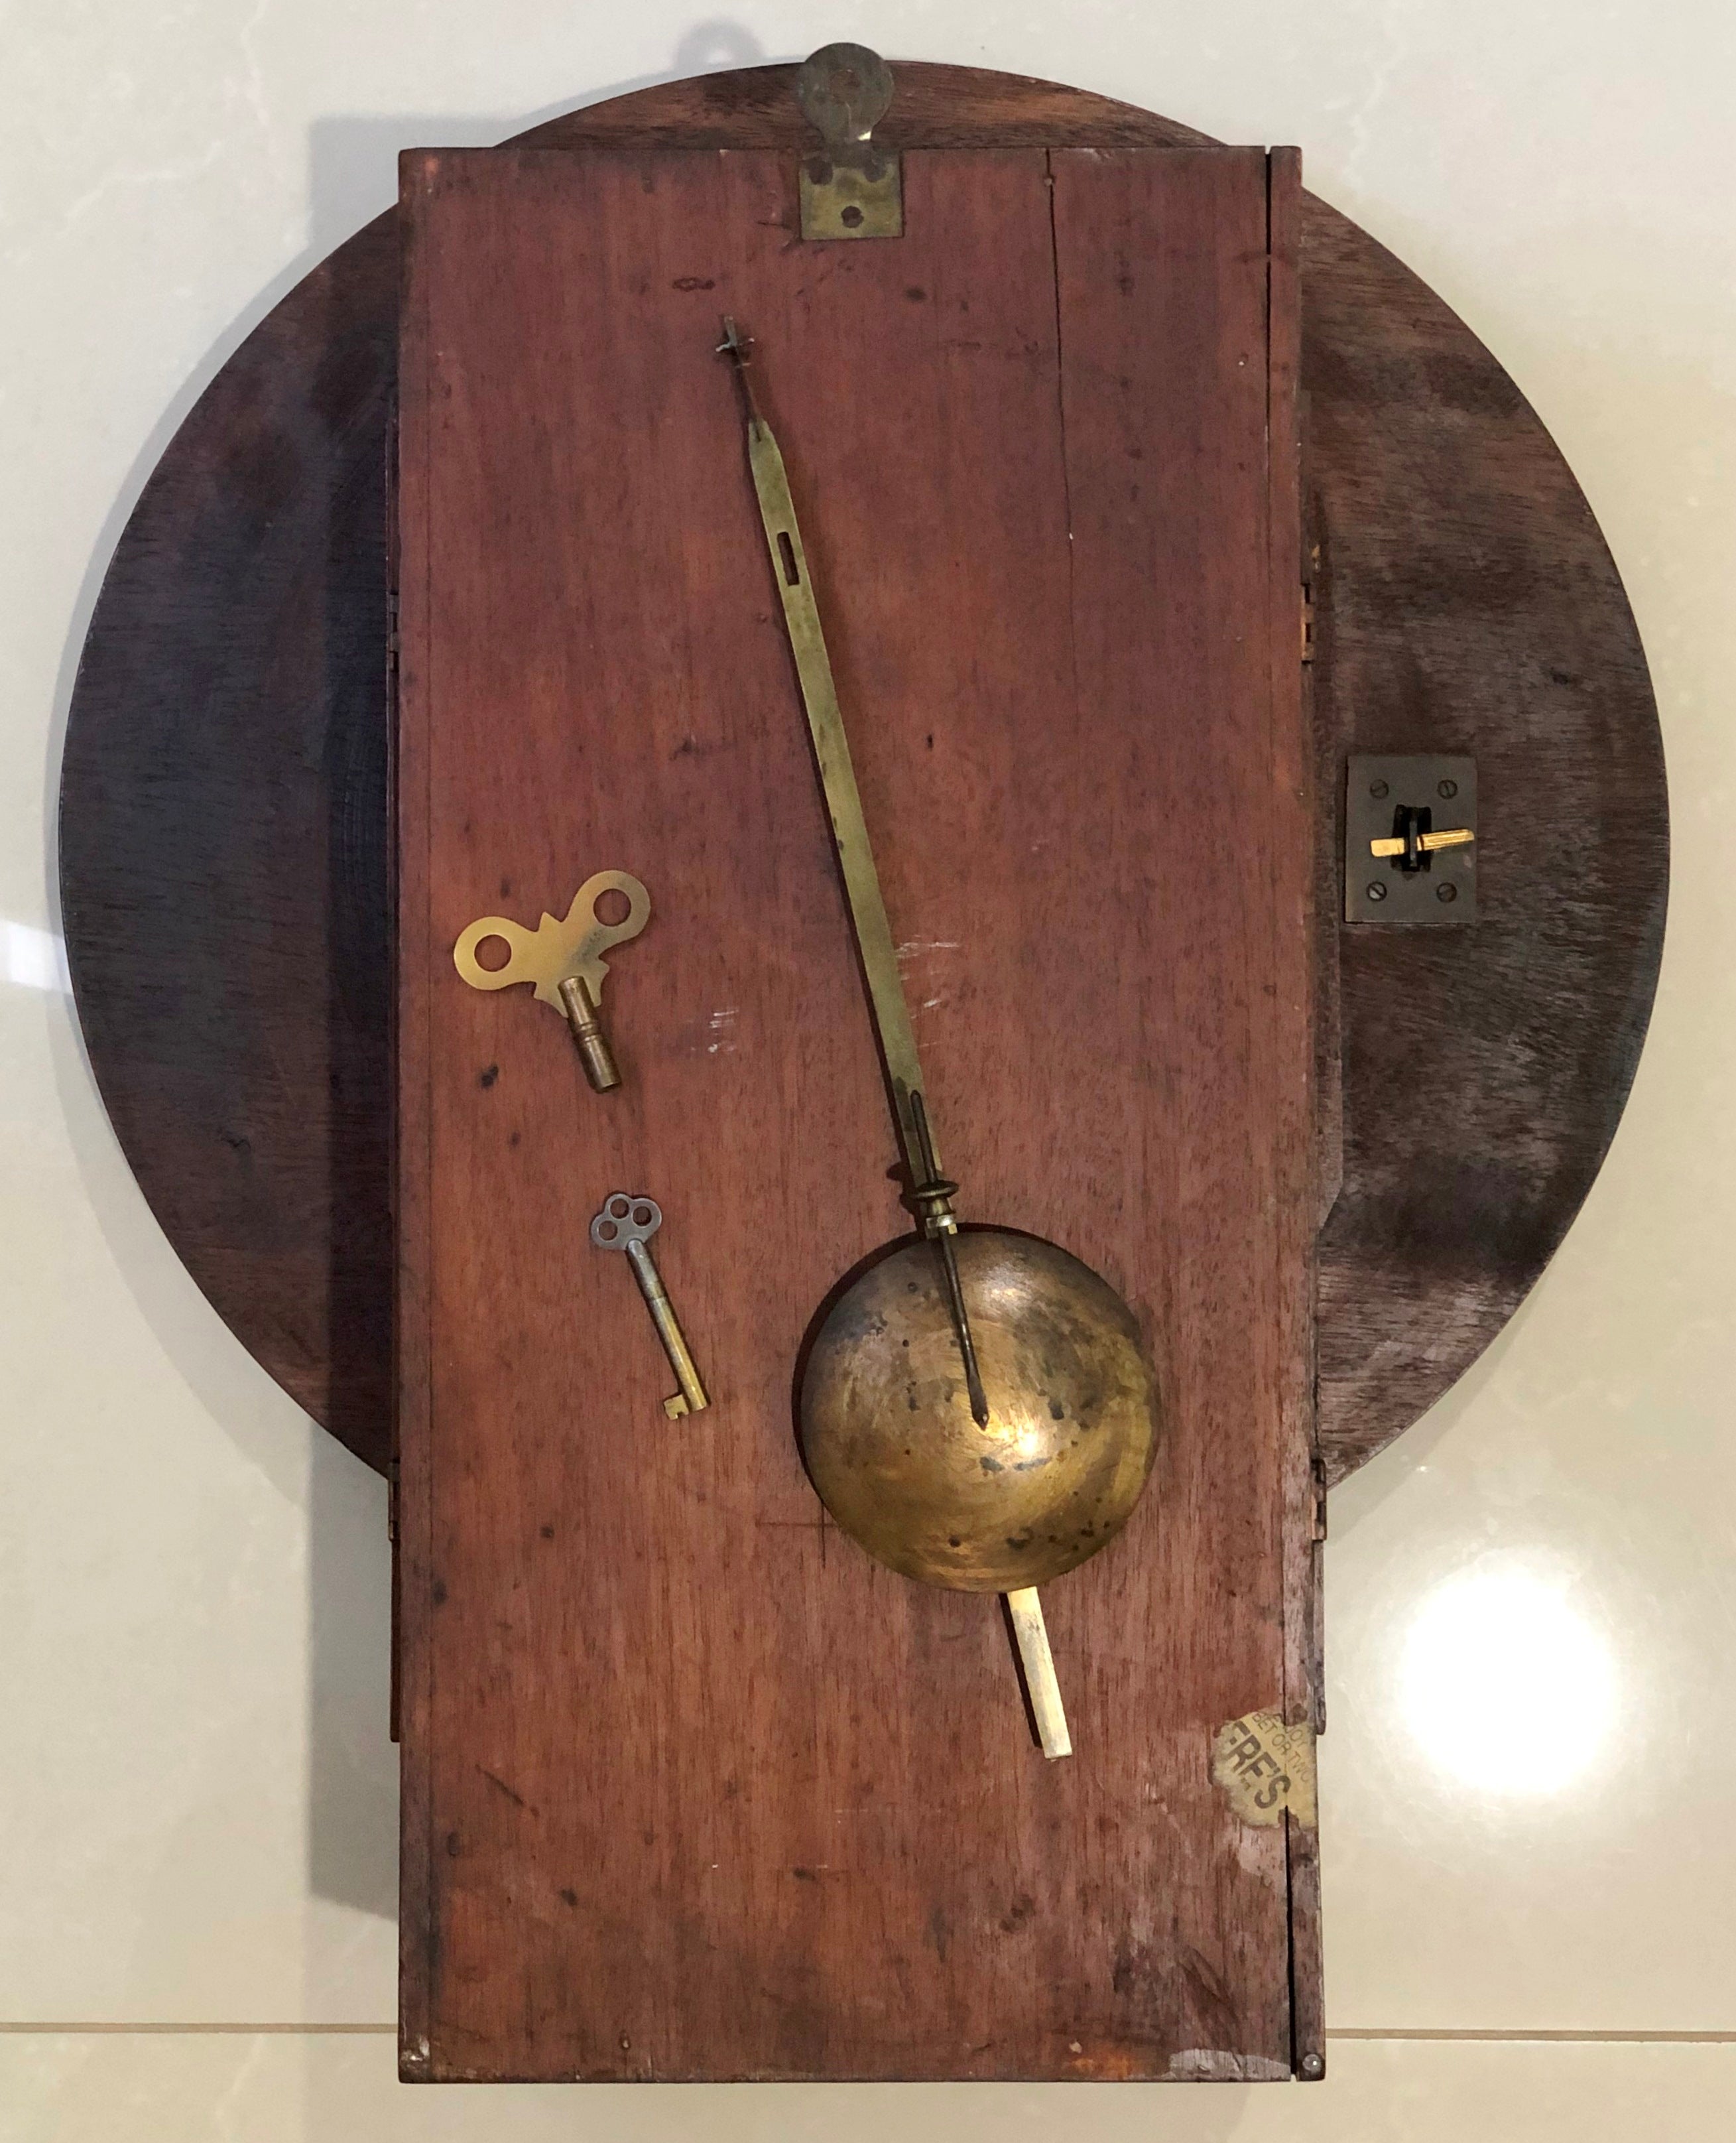 Antique Watchman's Pin Pendulum Fusee Wall Clock | eXibit collection